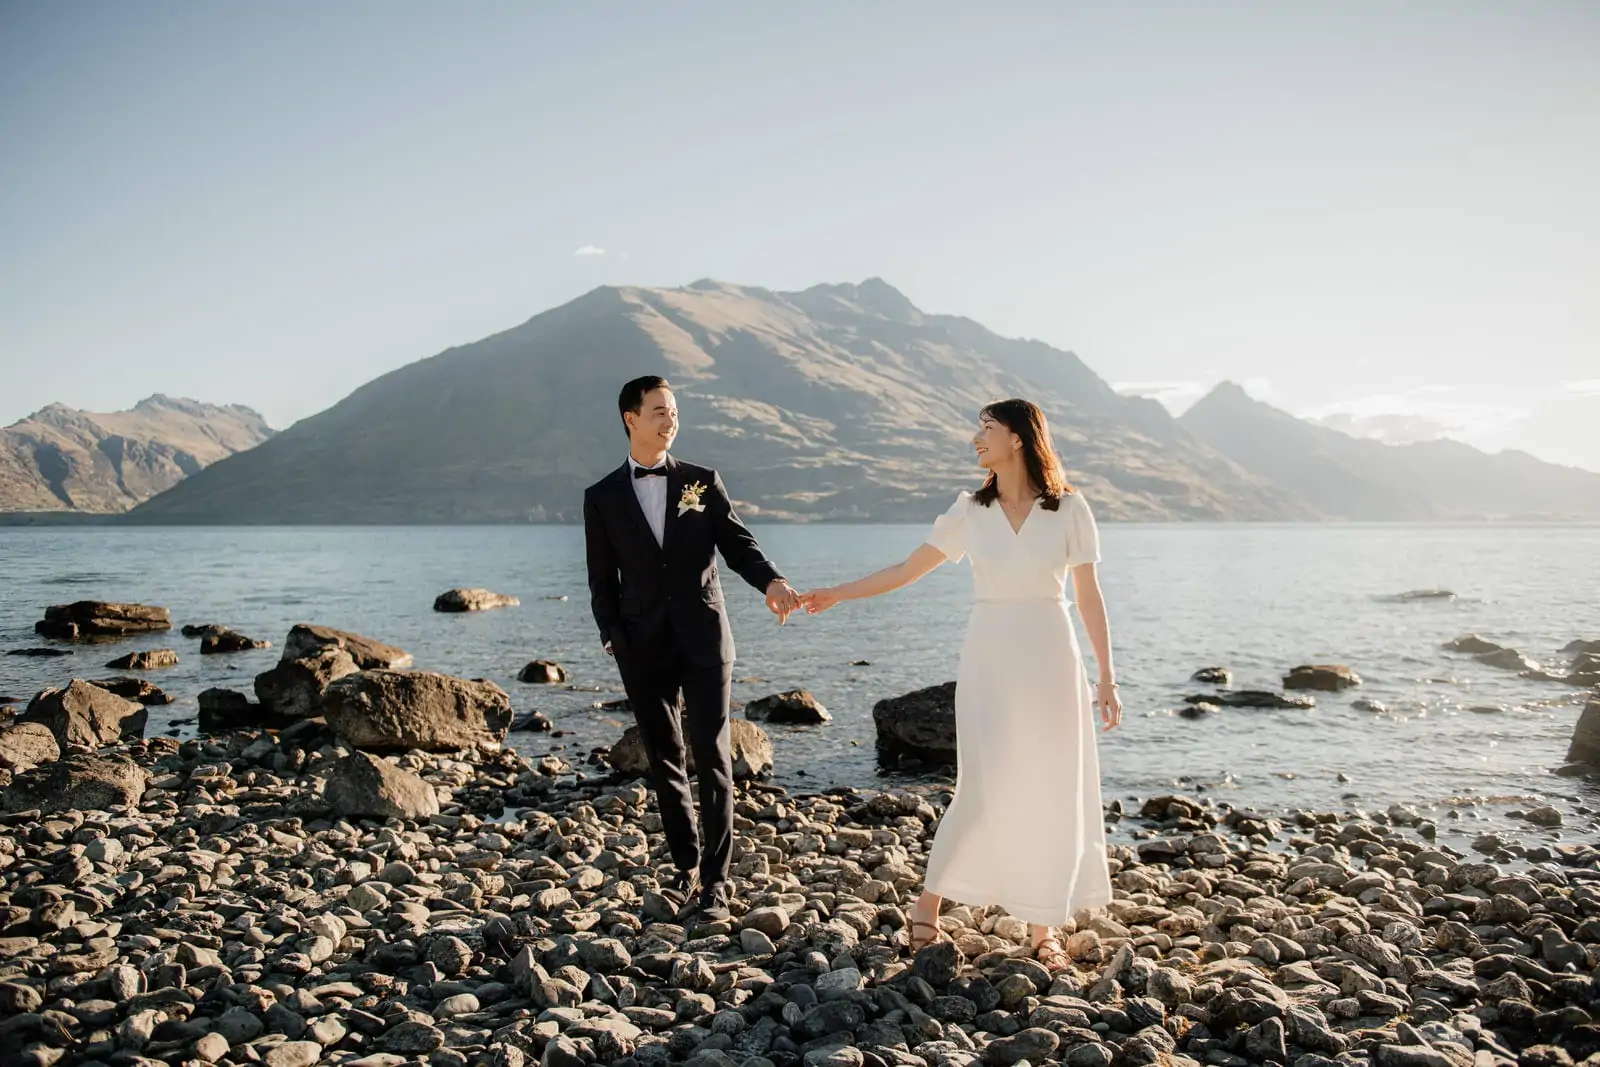 Bride and groom's mountain wedding in New Zealand (Previews).